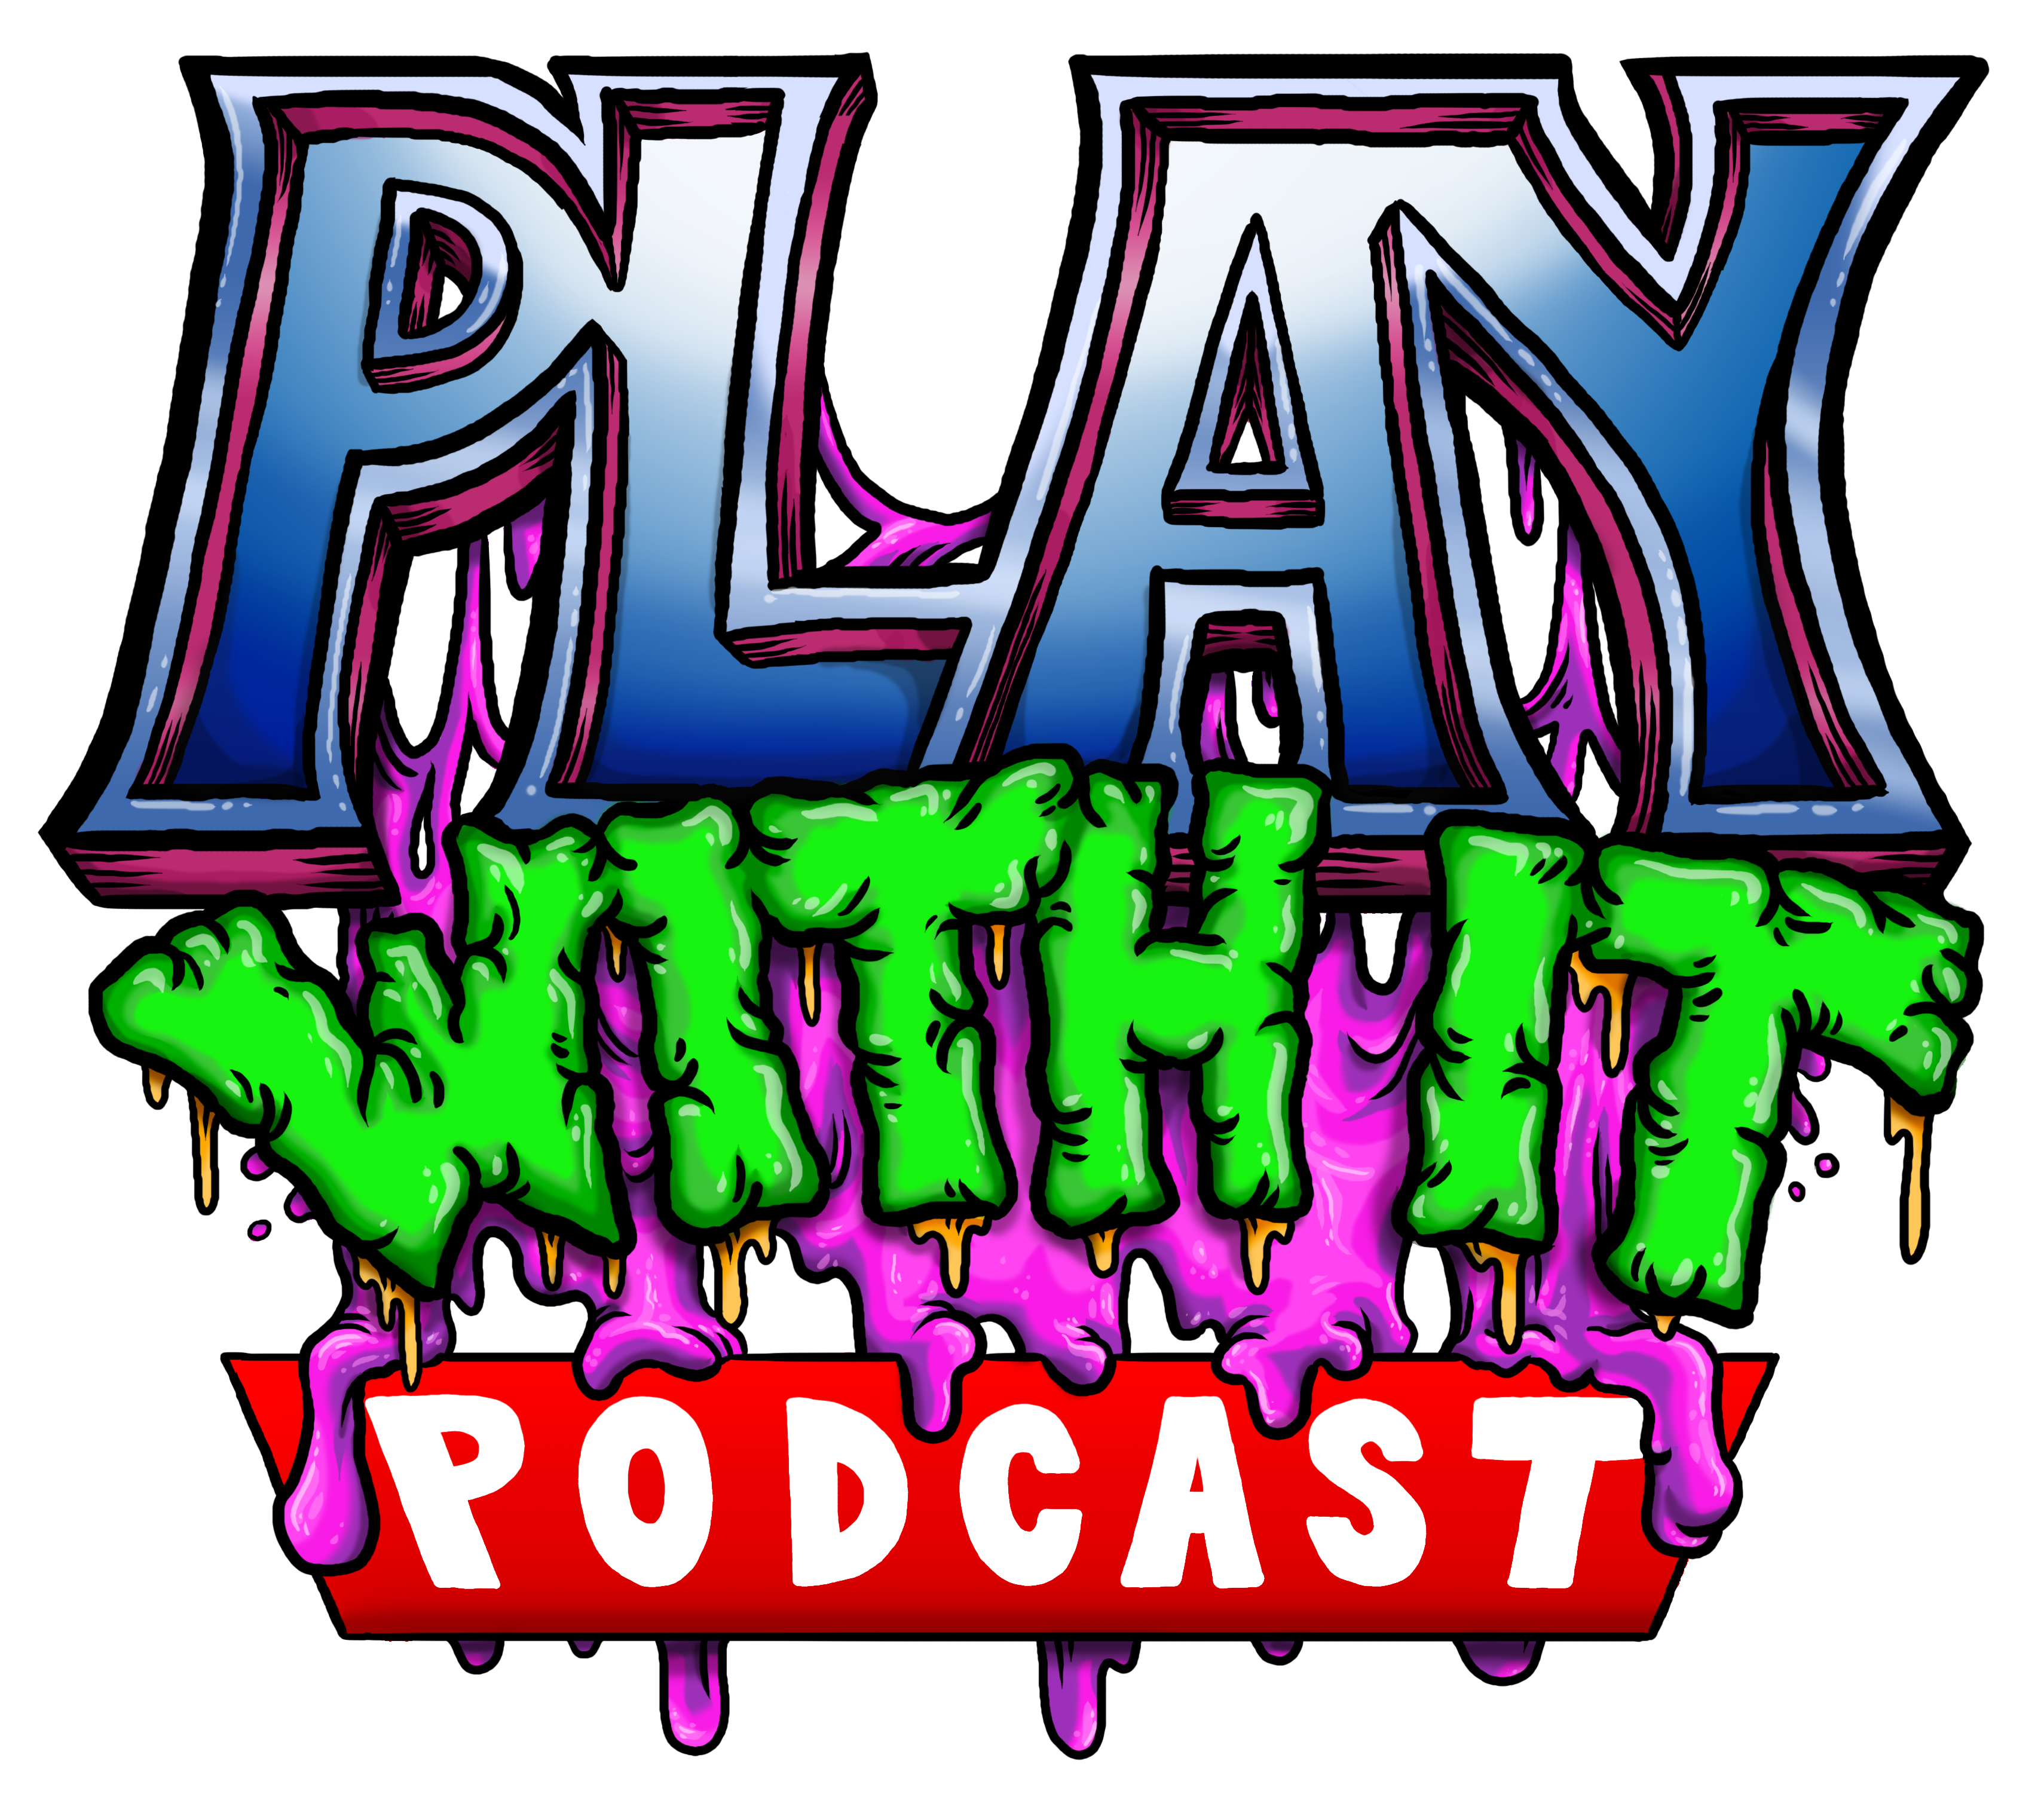 Play With It Podcast